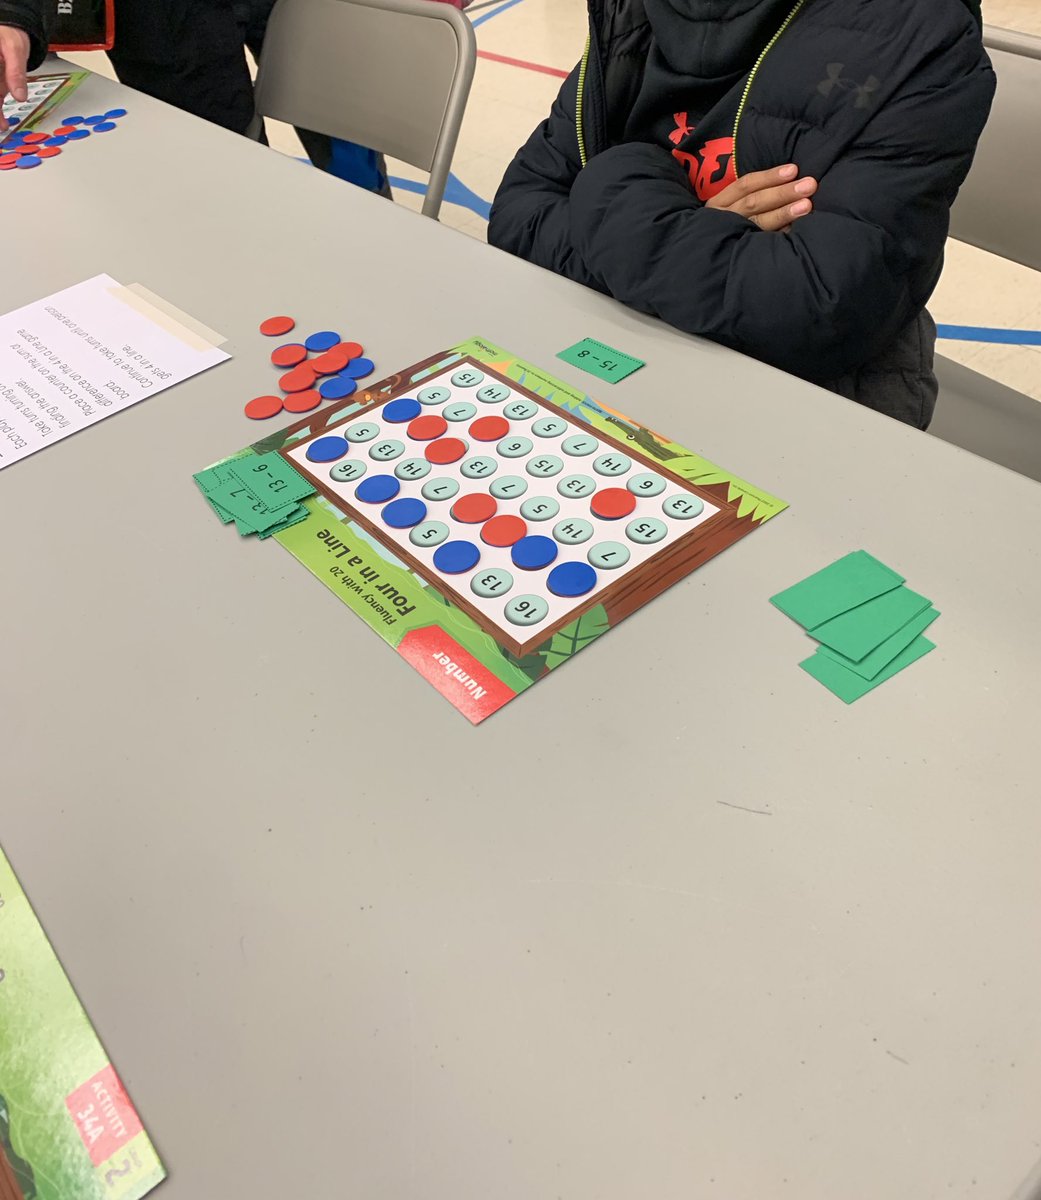 Family math night @STA_TCDSB was a huge #success! A wonderful community of parents, staff, and students came together to play some fun and interactive #math games.